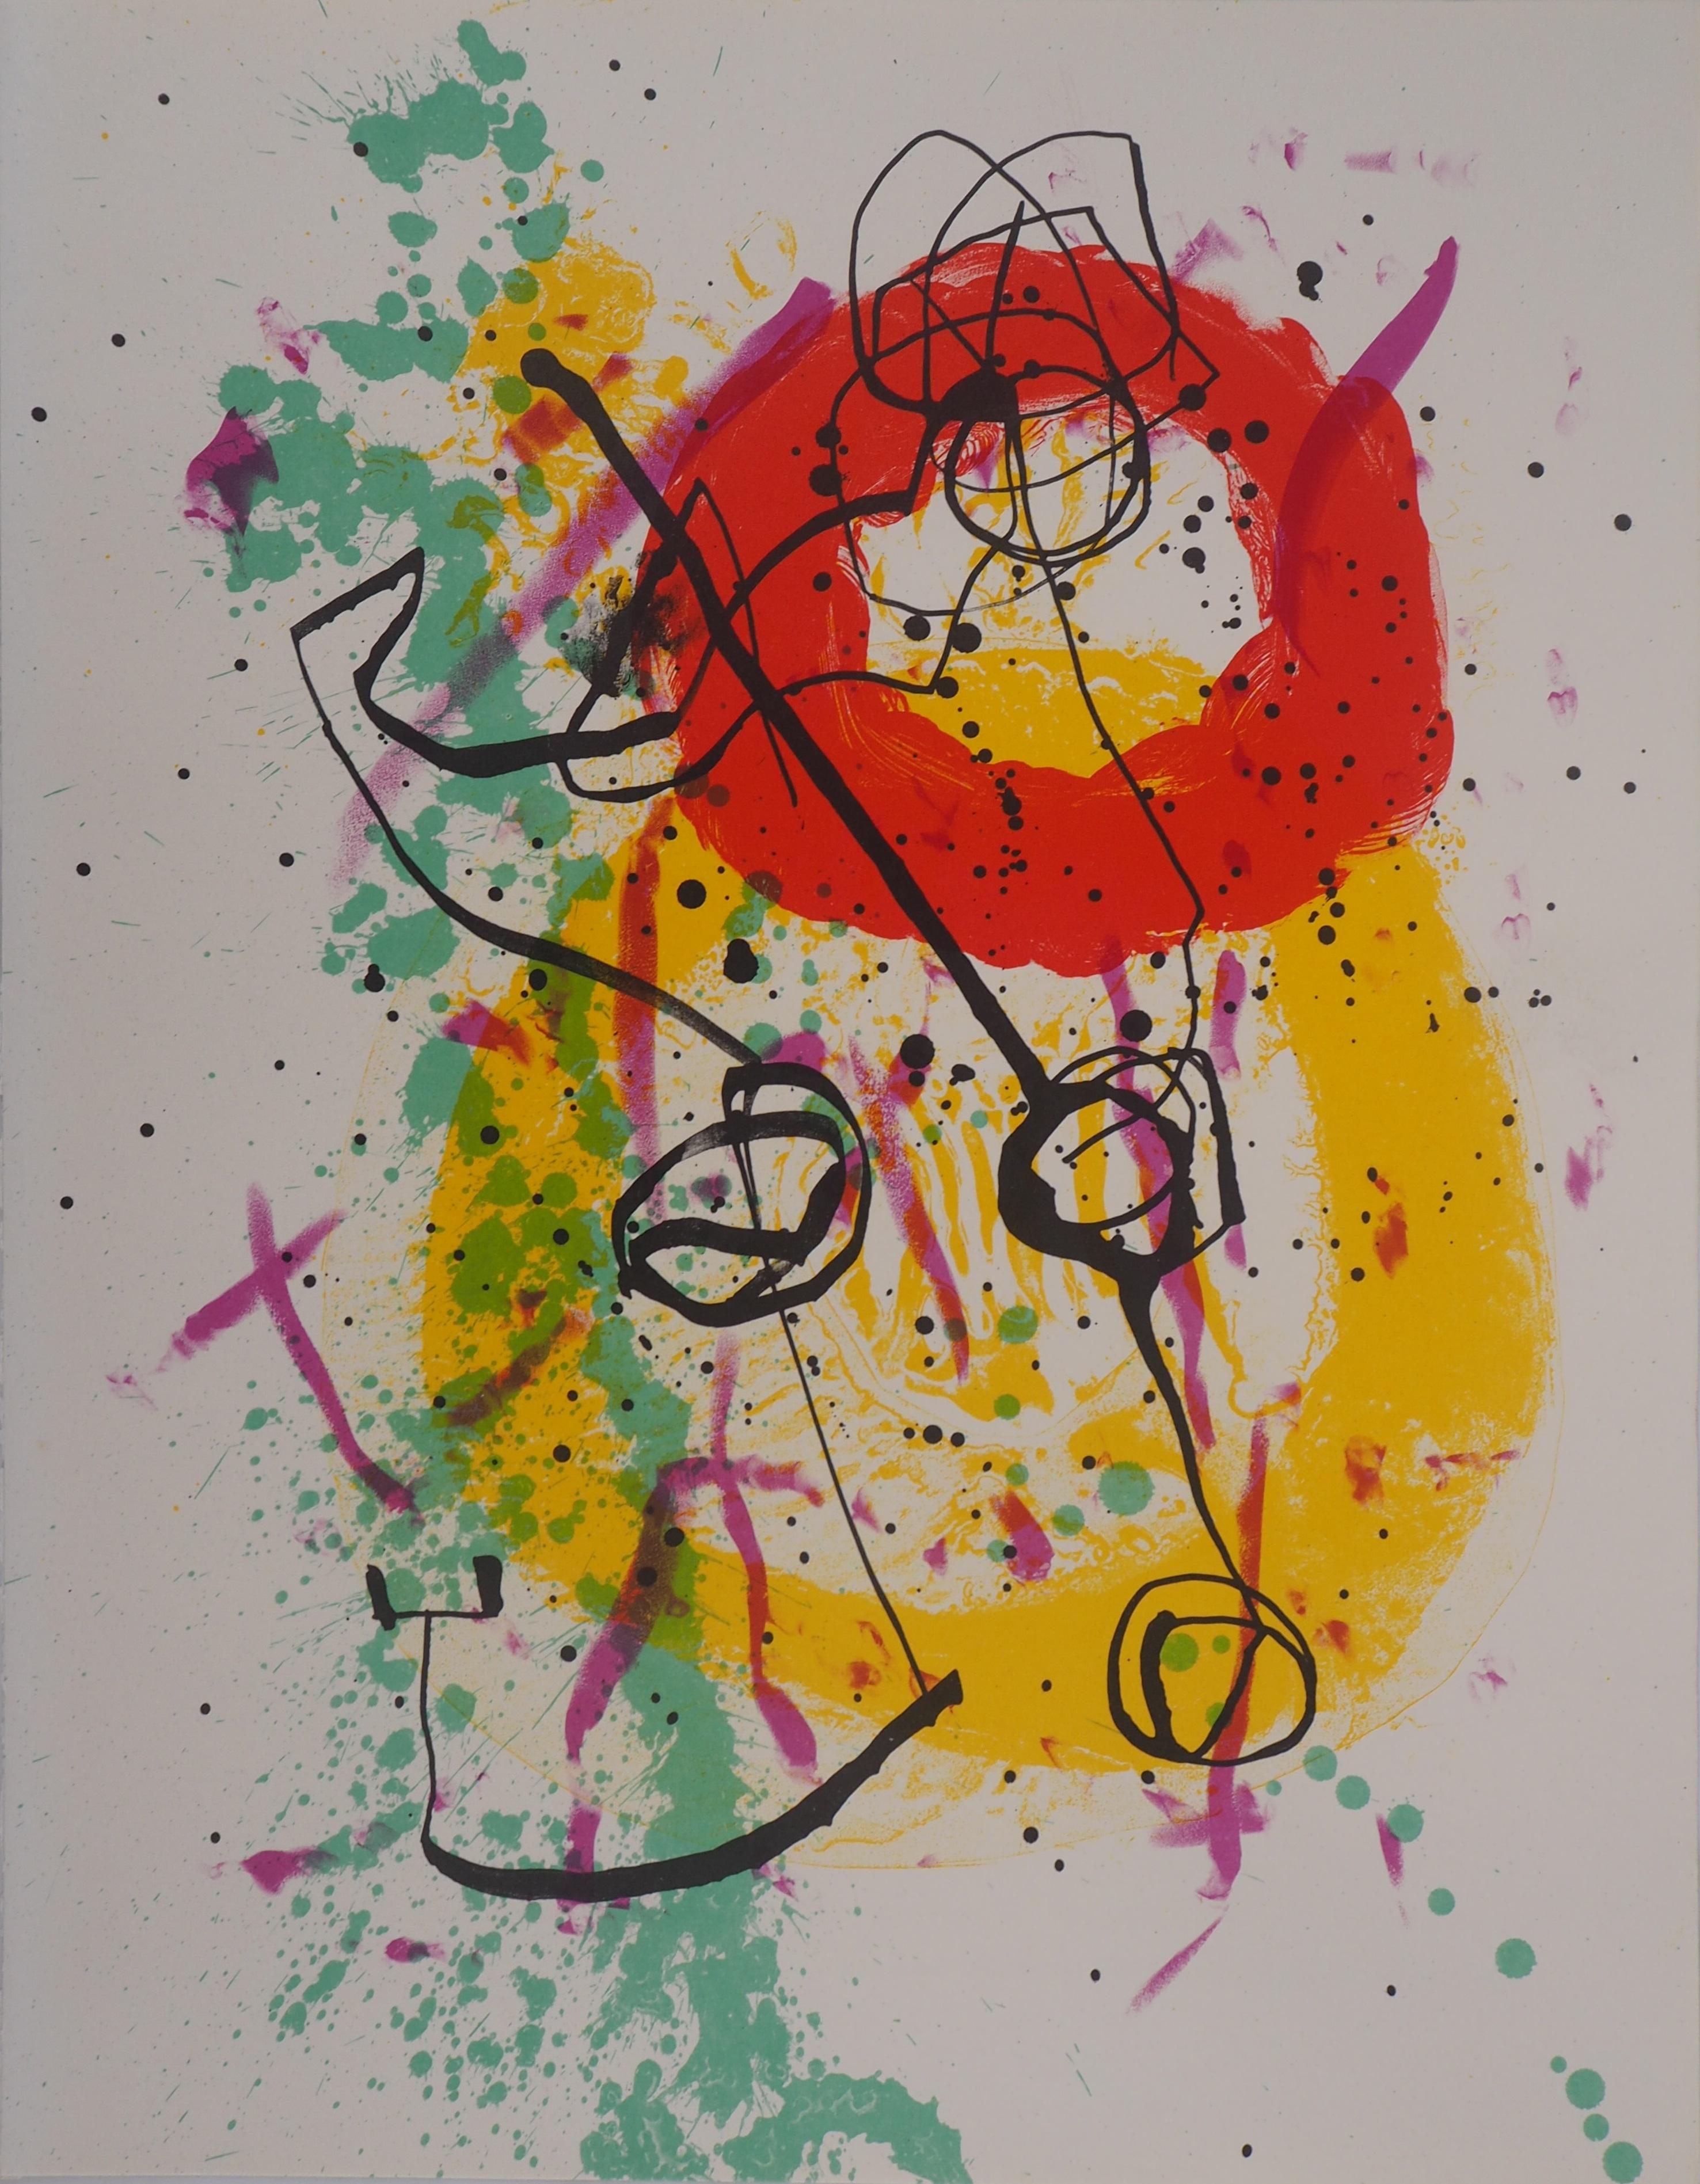 Composition with red and yellow circles - Original lithograph (Maeght #206)